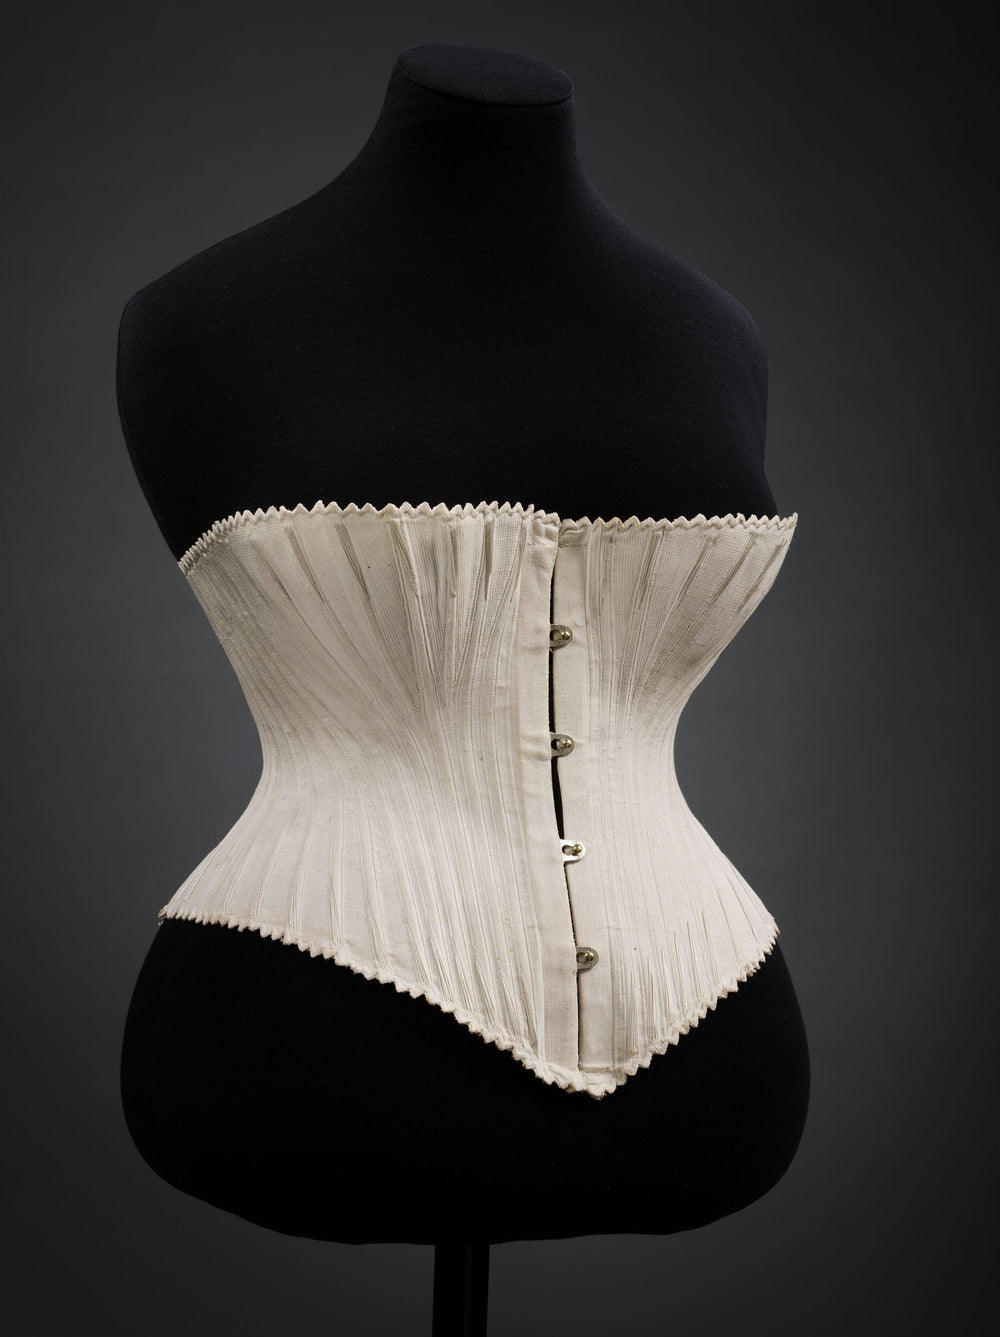 The Corset Stays the Course - The New York Times